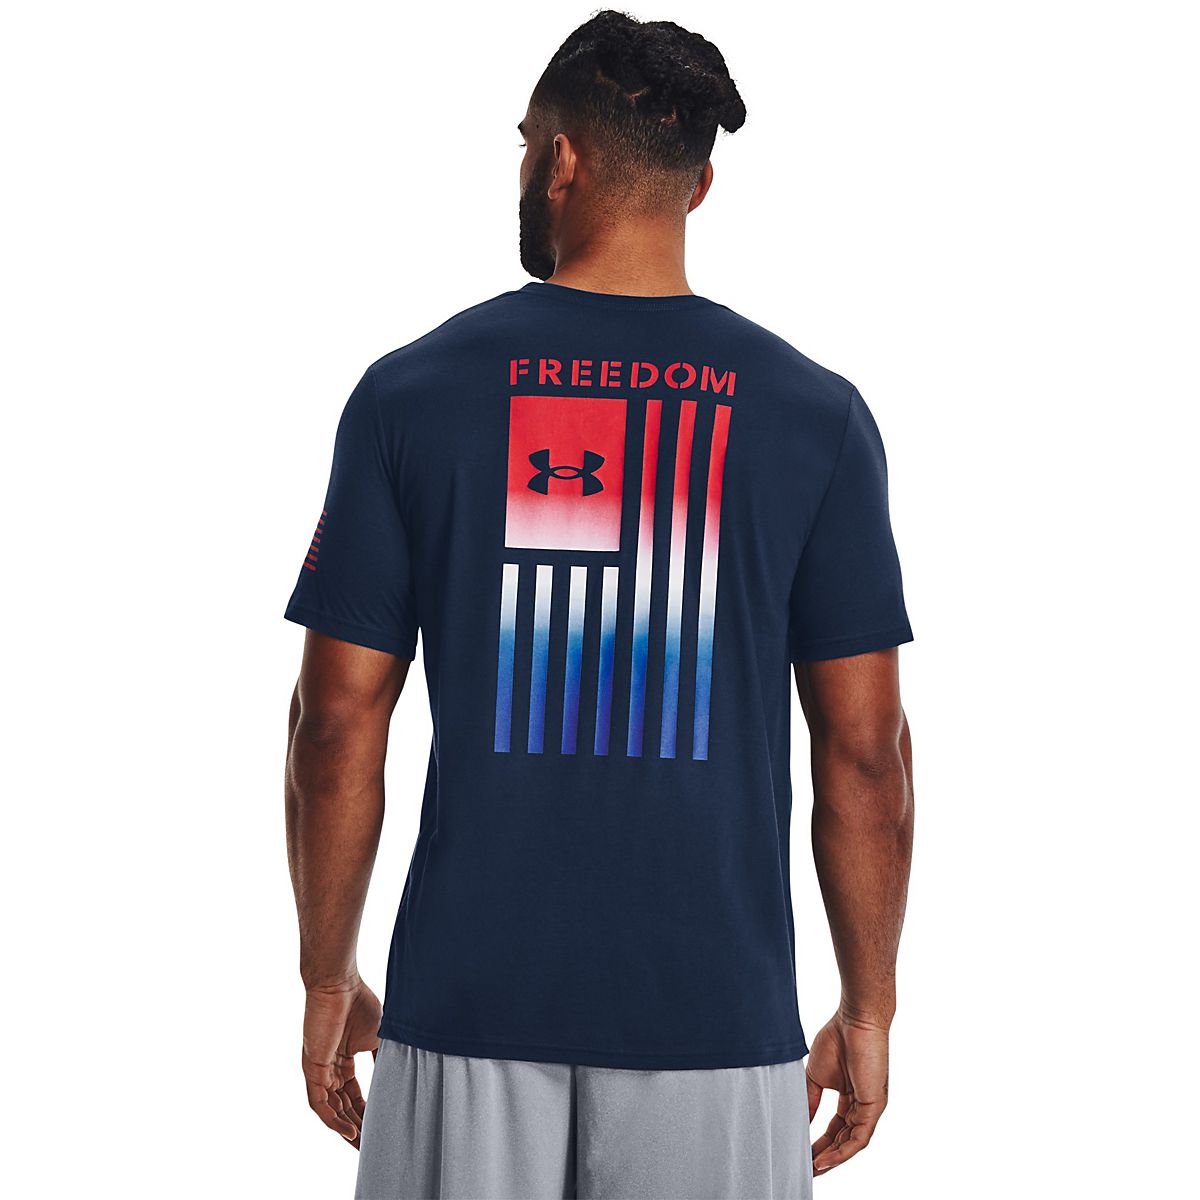 I'm so over Under Armour and its cynical appeals to American patriotism, Shop T Shirts Made in USA